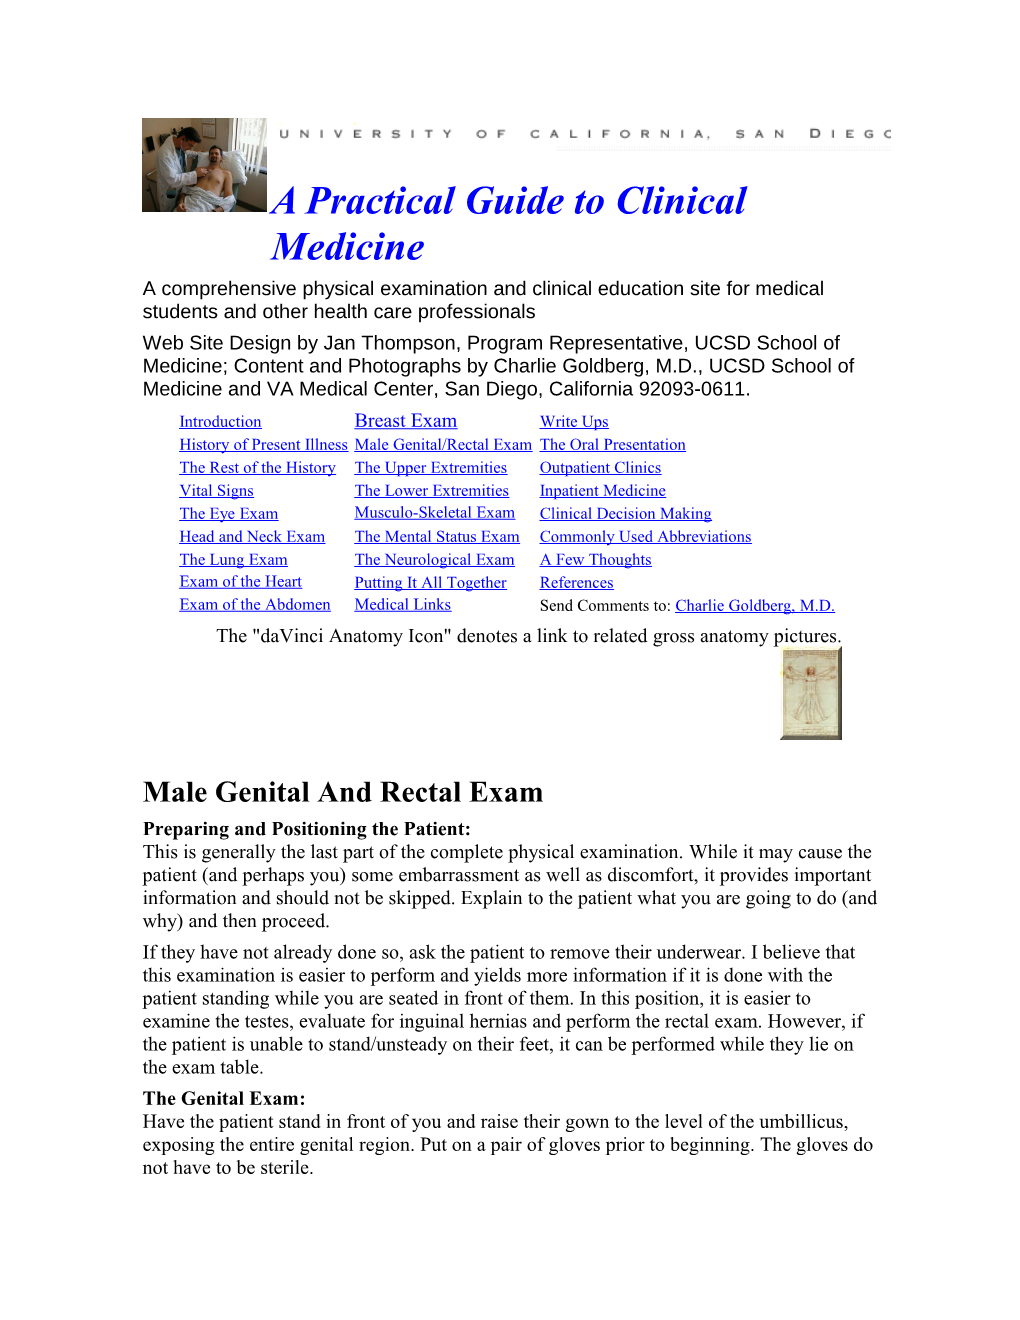 Male Genital and Rectal Exam